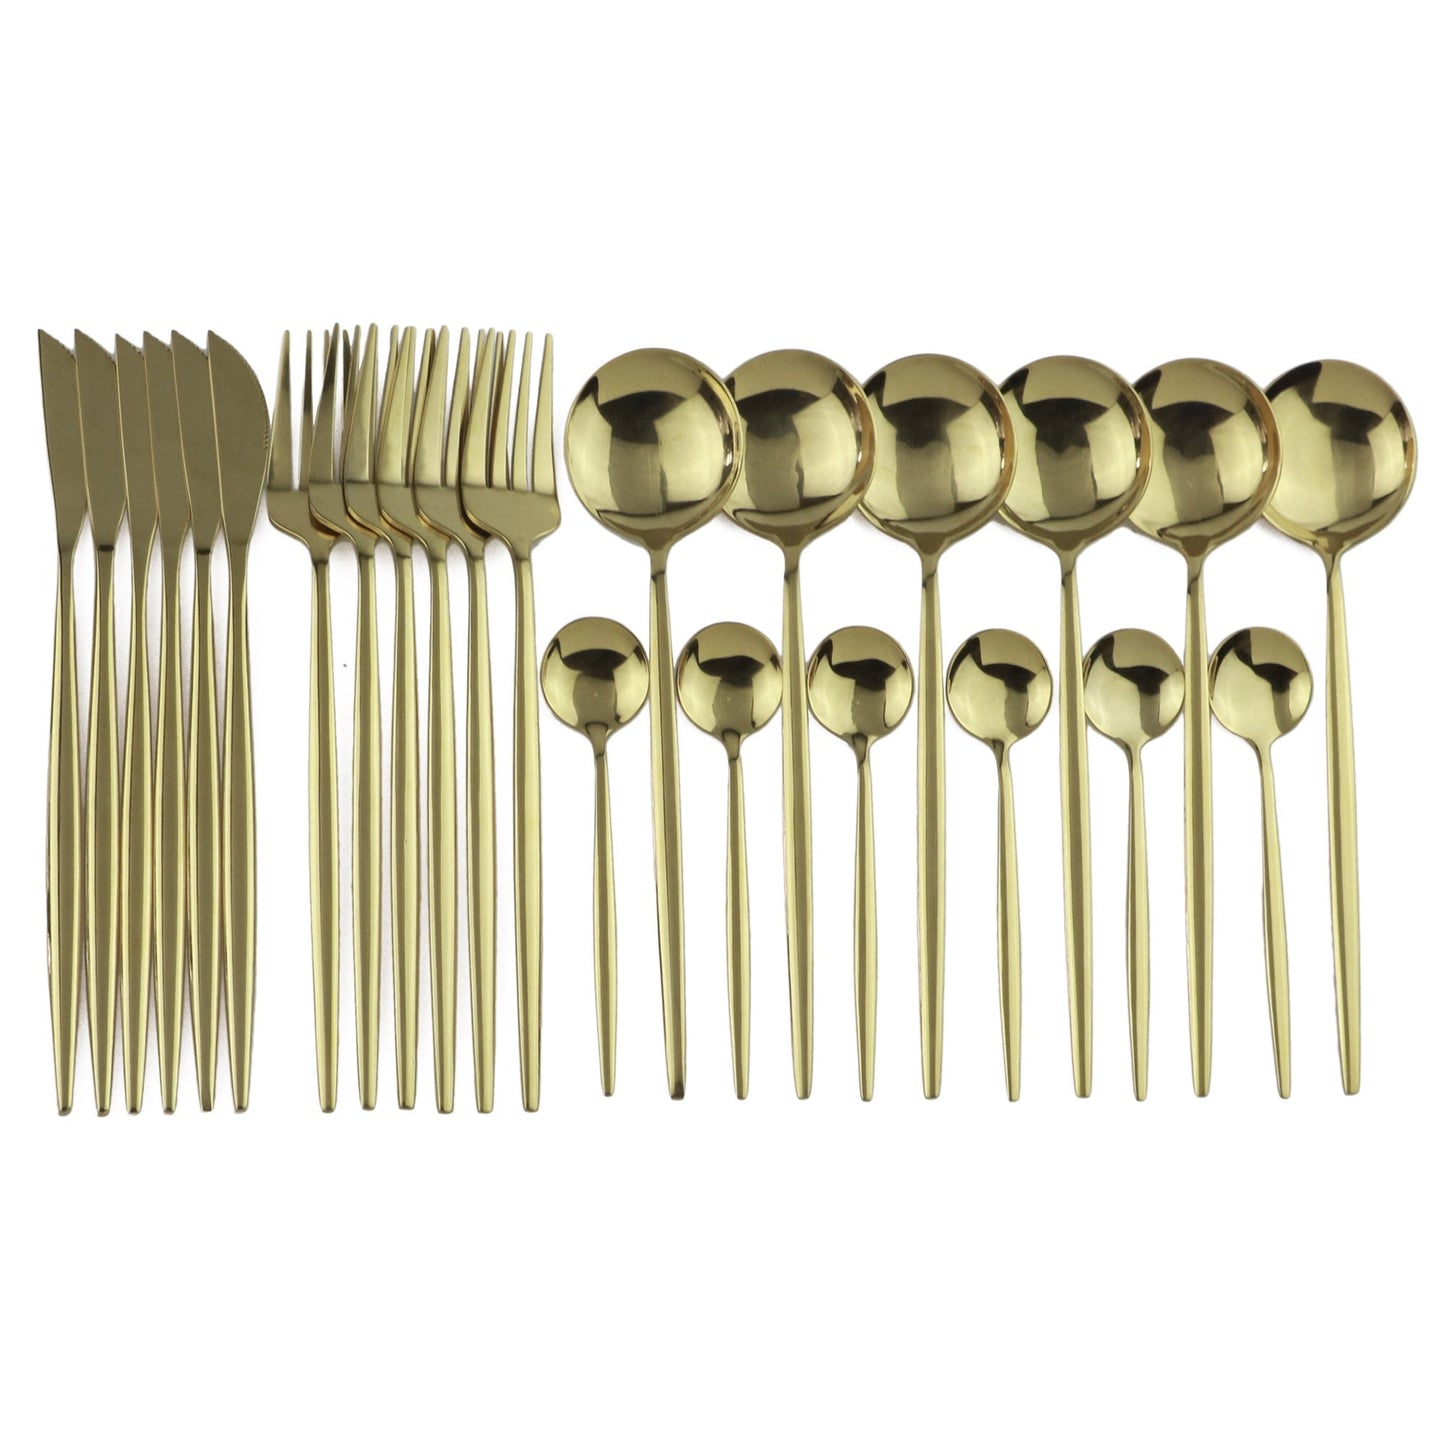 24pcs Western Cutlery Set-Champagne Gold